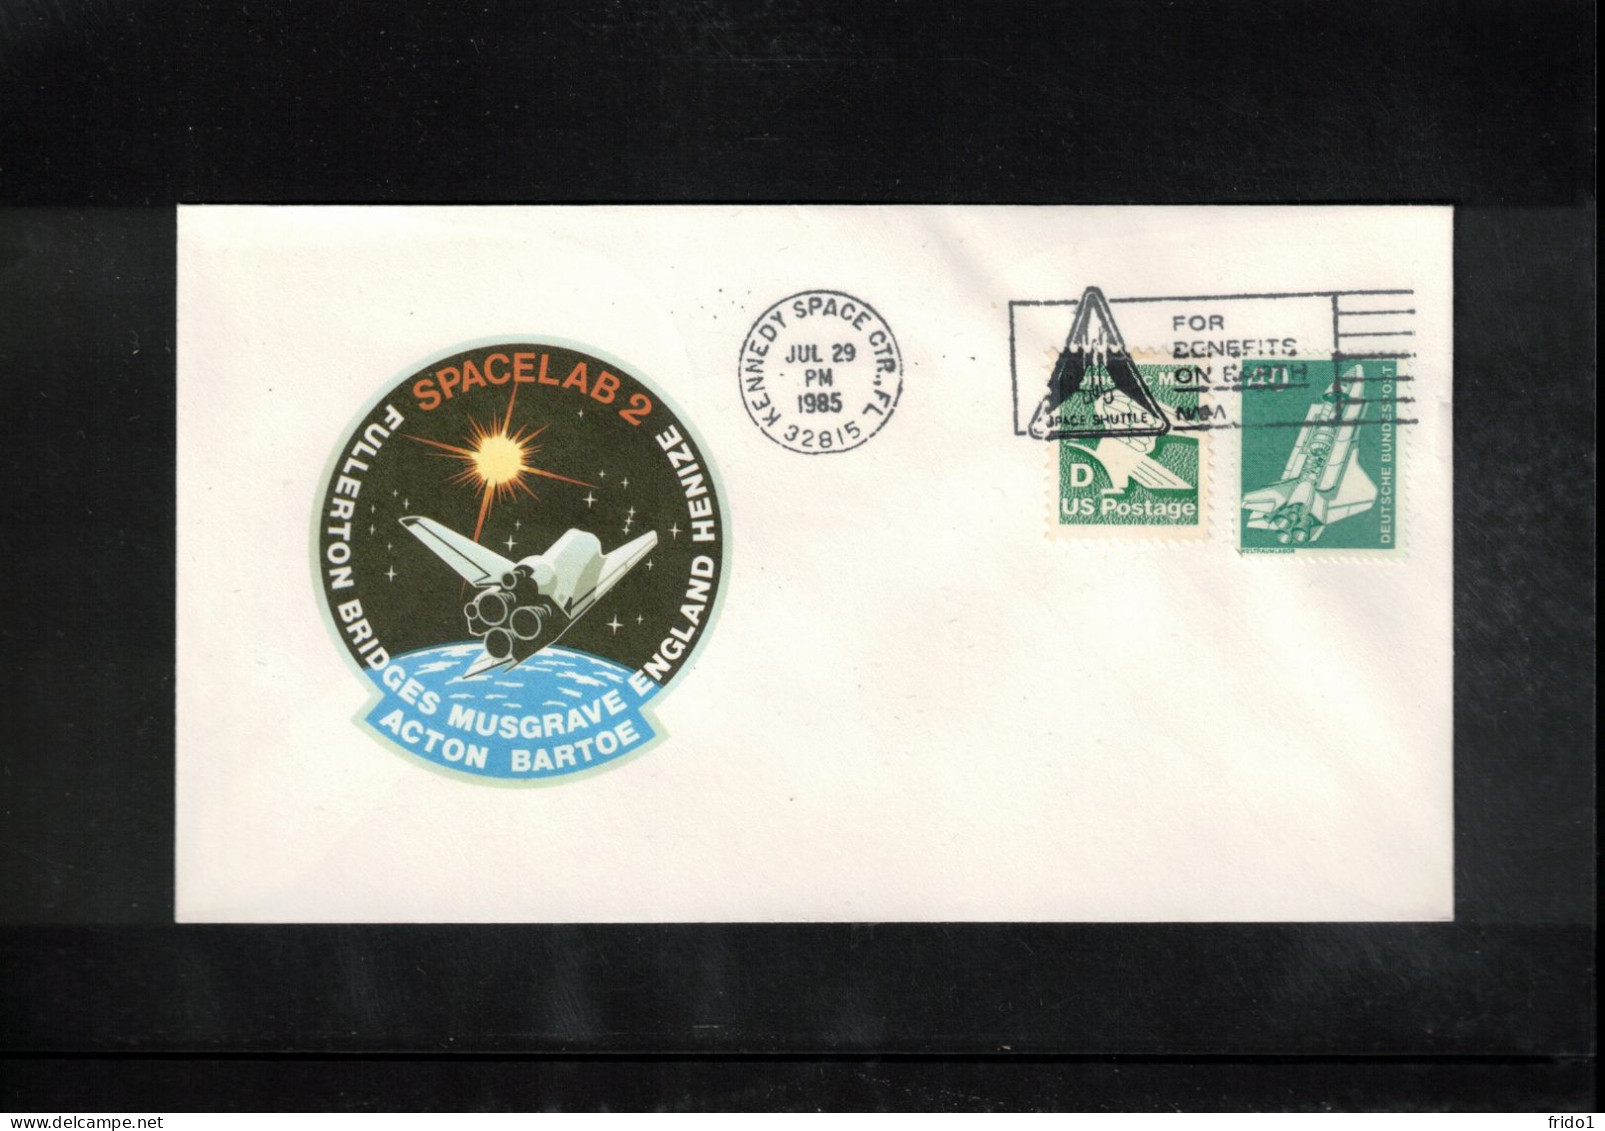 USA + Germany 1985 Space / Weltraum Space Shuttle + Spacelab 2 Interesting Cover - United States